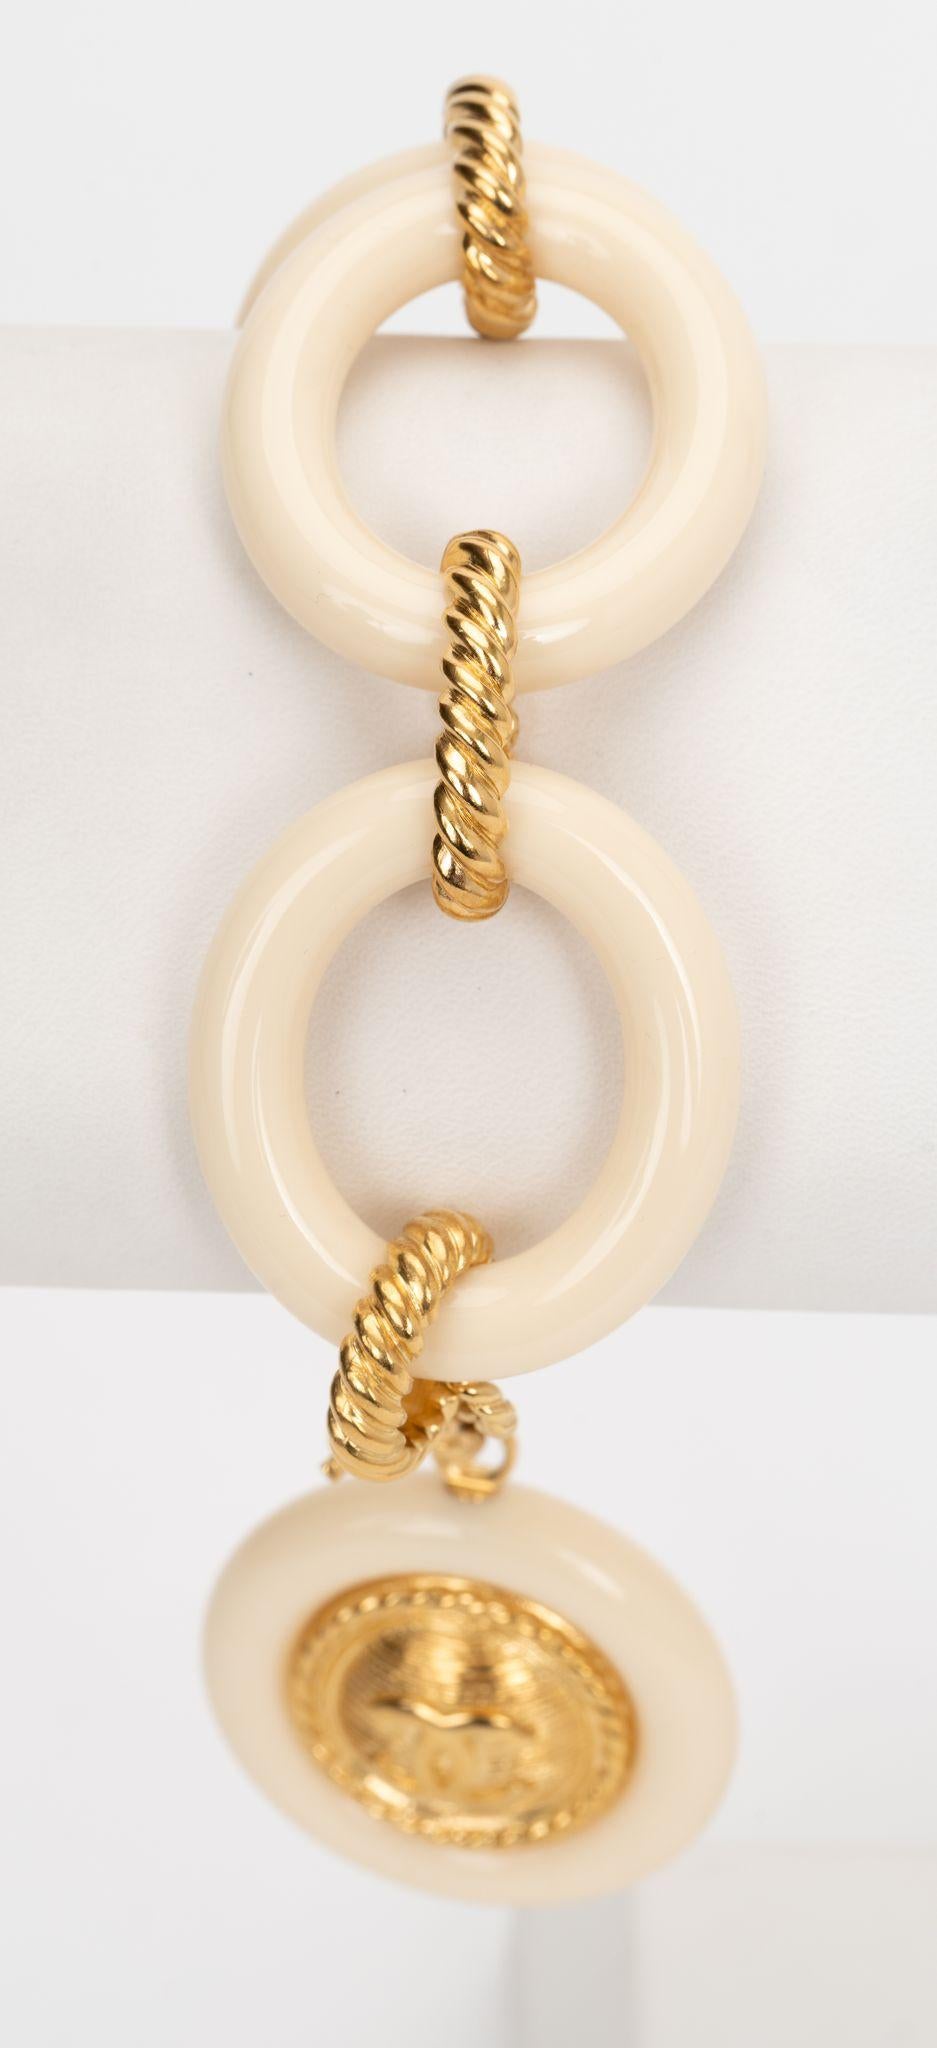 Chanel new oversize charm bracelet in cream plastic and gold metal. Unworn condition. 
Collection autumn 2016.
Comes with booklet and original box.